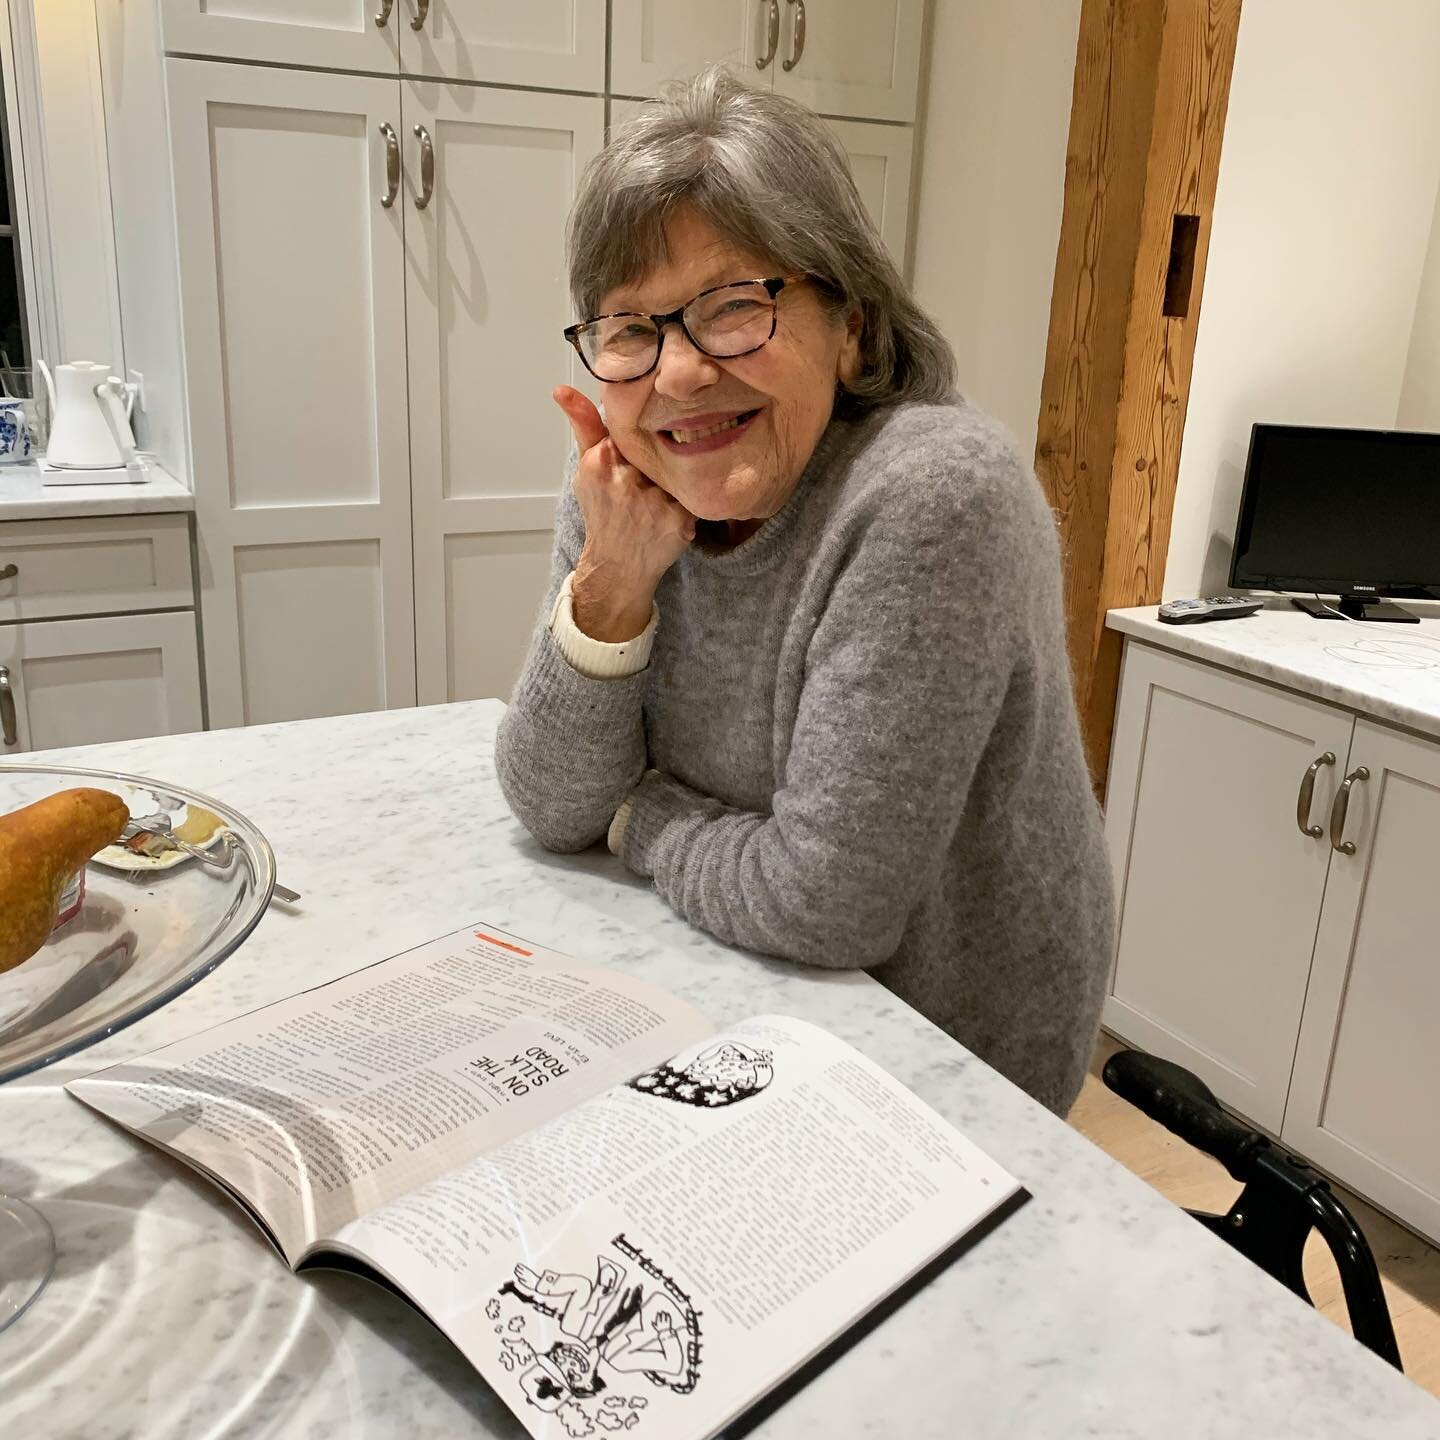 A real Hanukkah miracle: Grams, 95, relishing her newfound freedom at home, scans my story in the Journal of Dreams before sitting down for some lip-smacking latkes. There&rsquo;s no greater gift than that! ✨😋➡️

#hanukkah2020